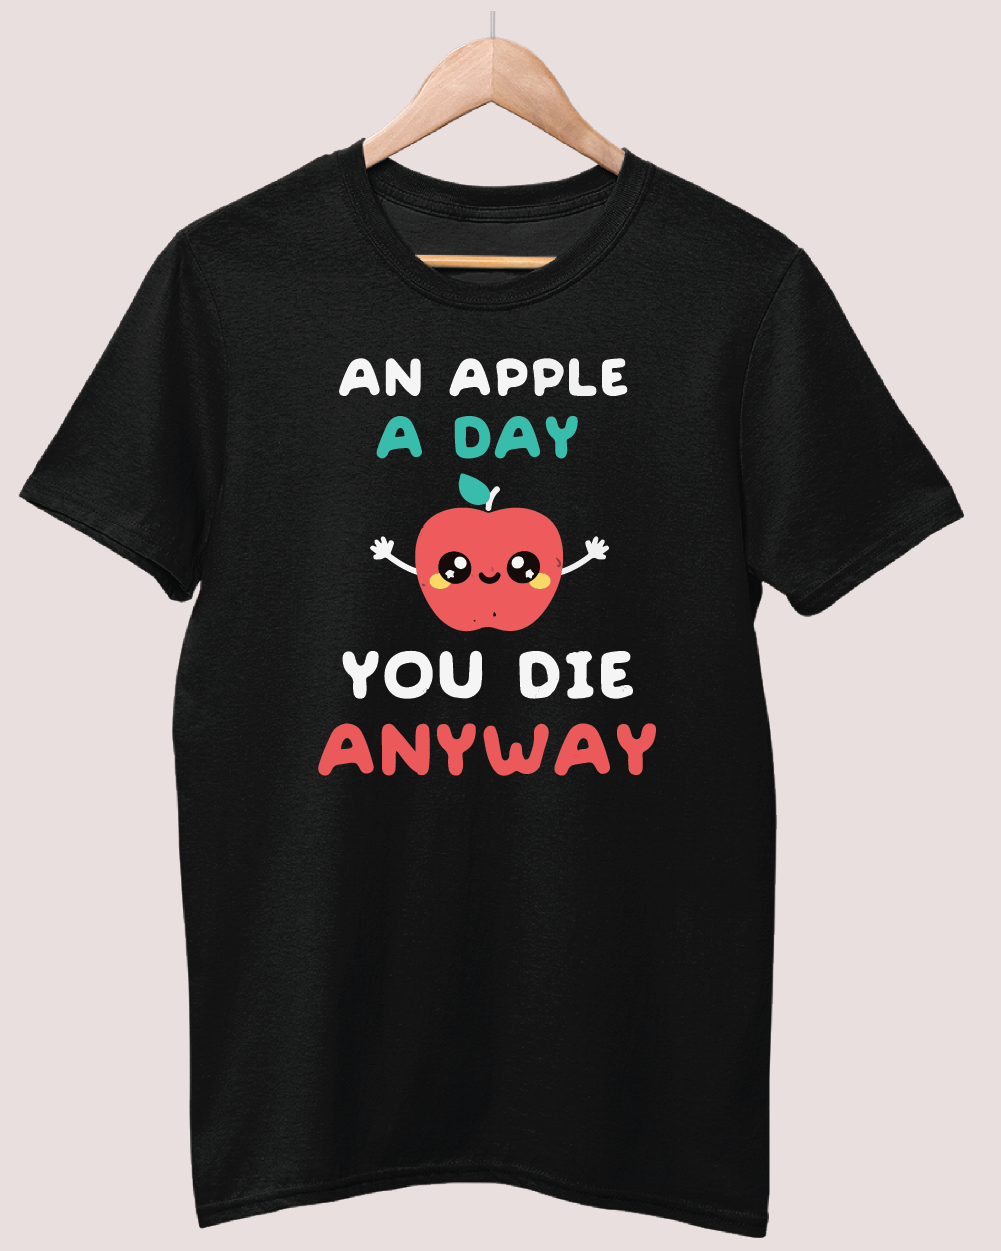 An apple a day you die anyway t-shirt